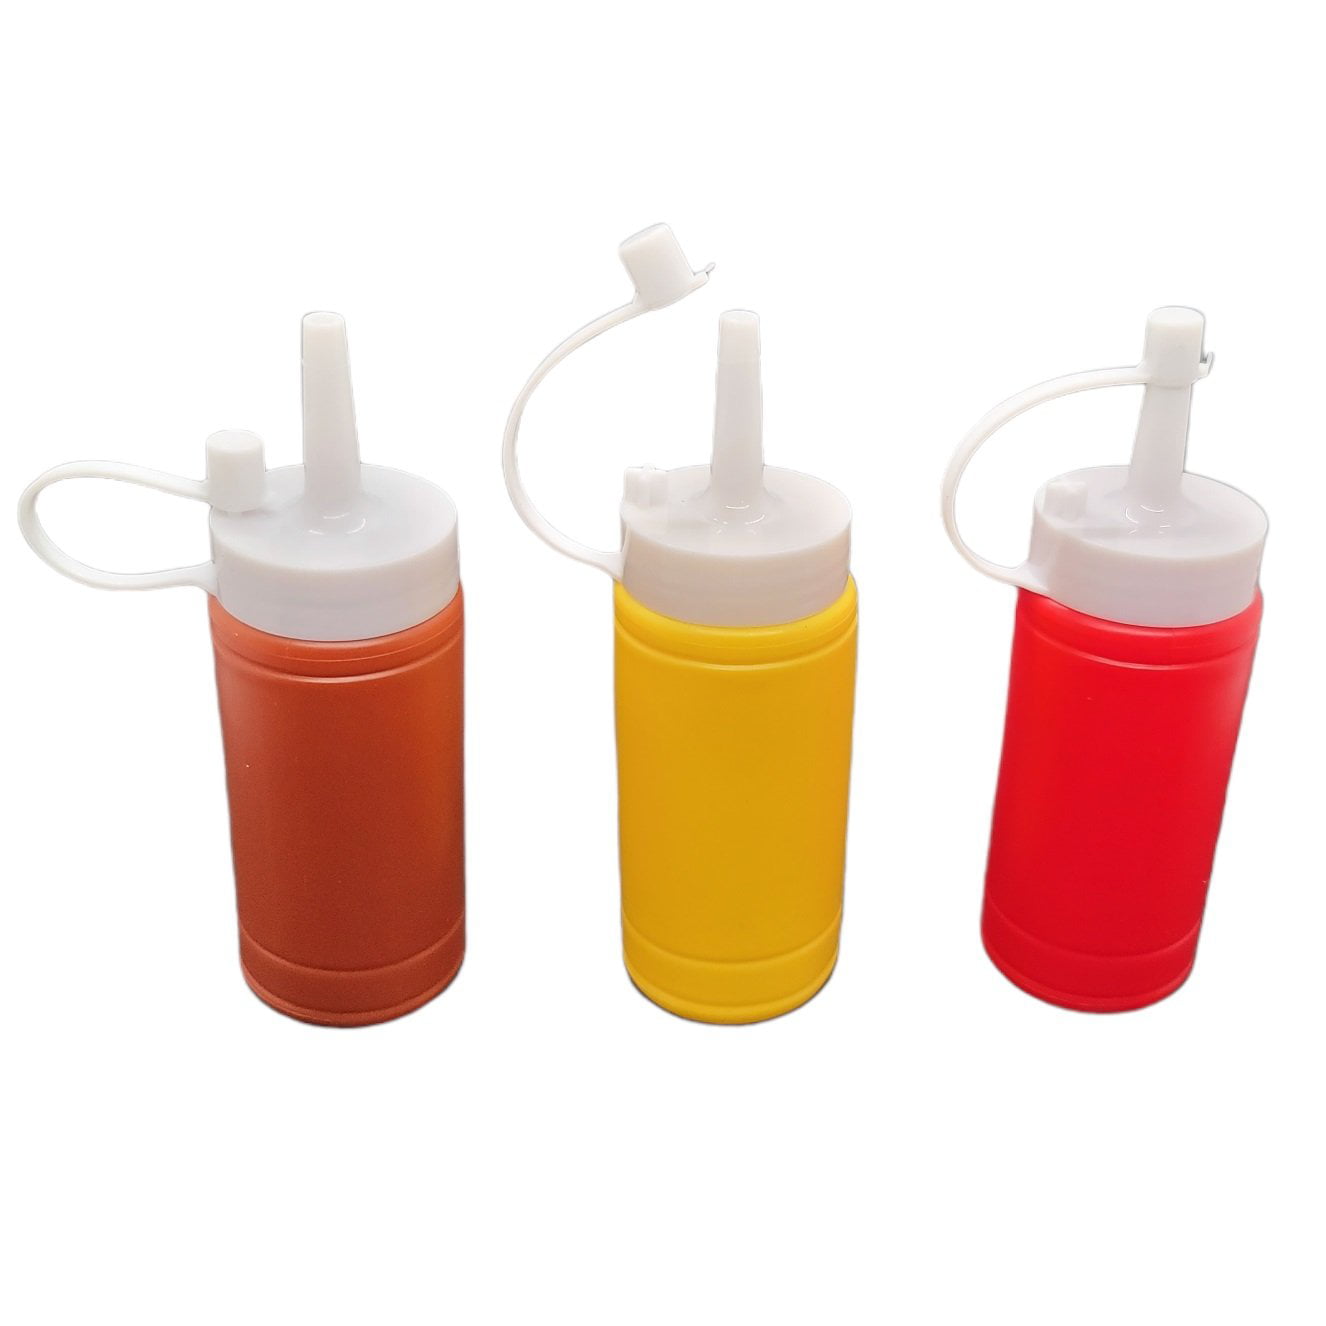  Mini Squeeze Bottles For Sauces,25ml Condiment Squeeze Bottle,  2/3/8/12 PCS Small Ketchup Bottle,Multipurpose Squeeze Bottle For  Mayonnaise, Wasabi, Hot Sauce, Olive Oil, Barbecue Sauce And Ketchup : Home  & Kitchen